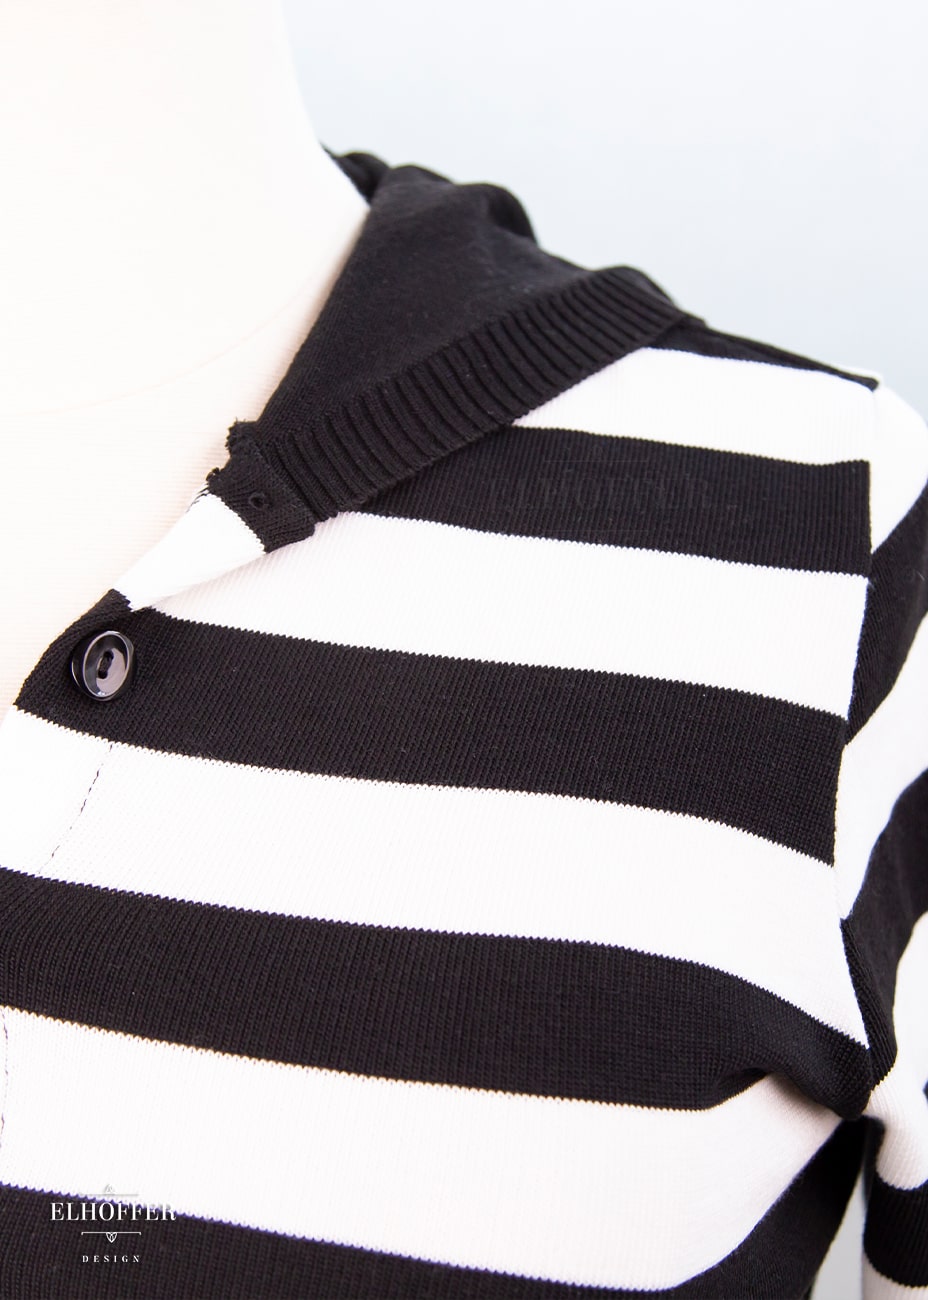 A close up of the black and white stripes and ribbing around the hood.